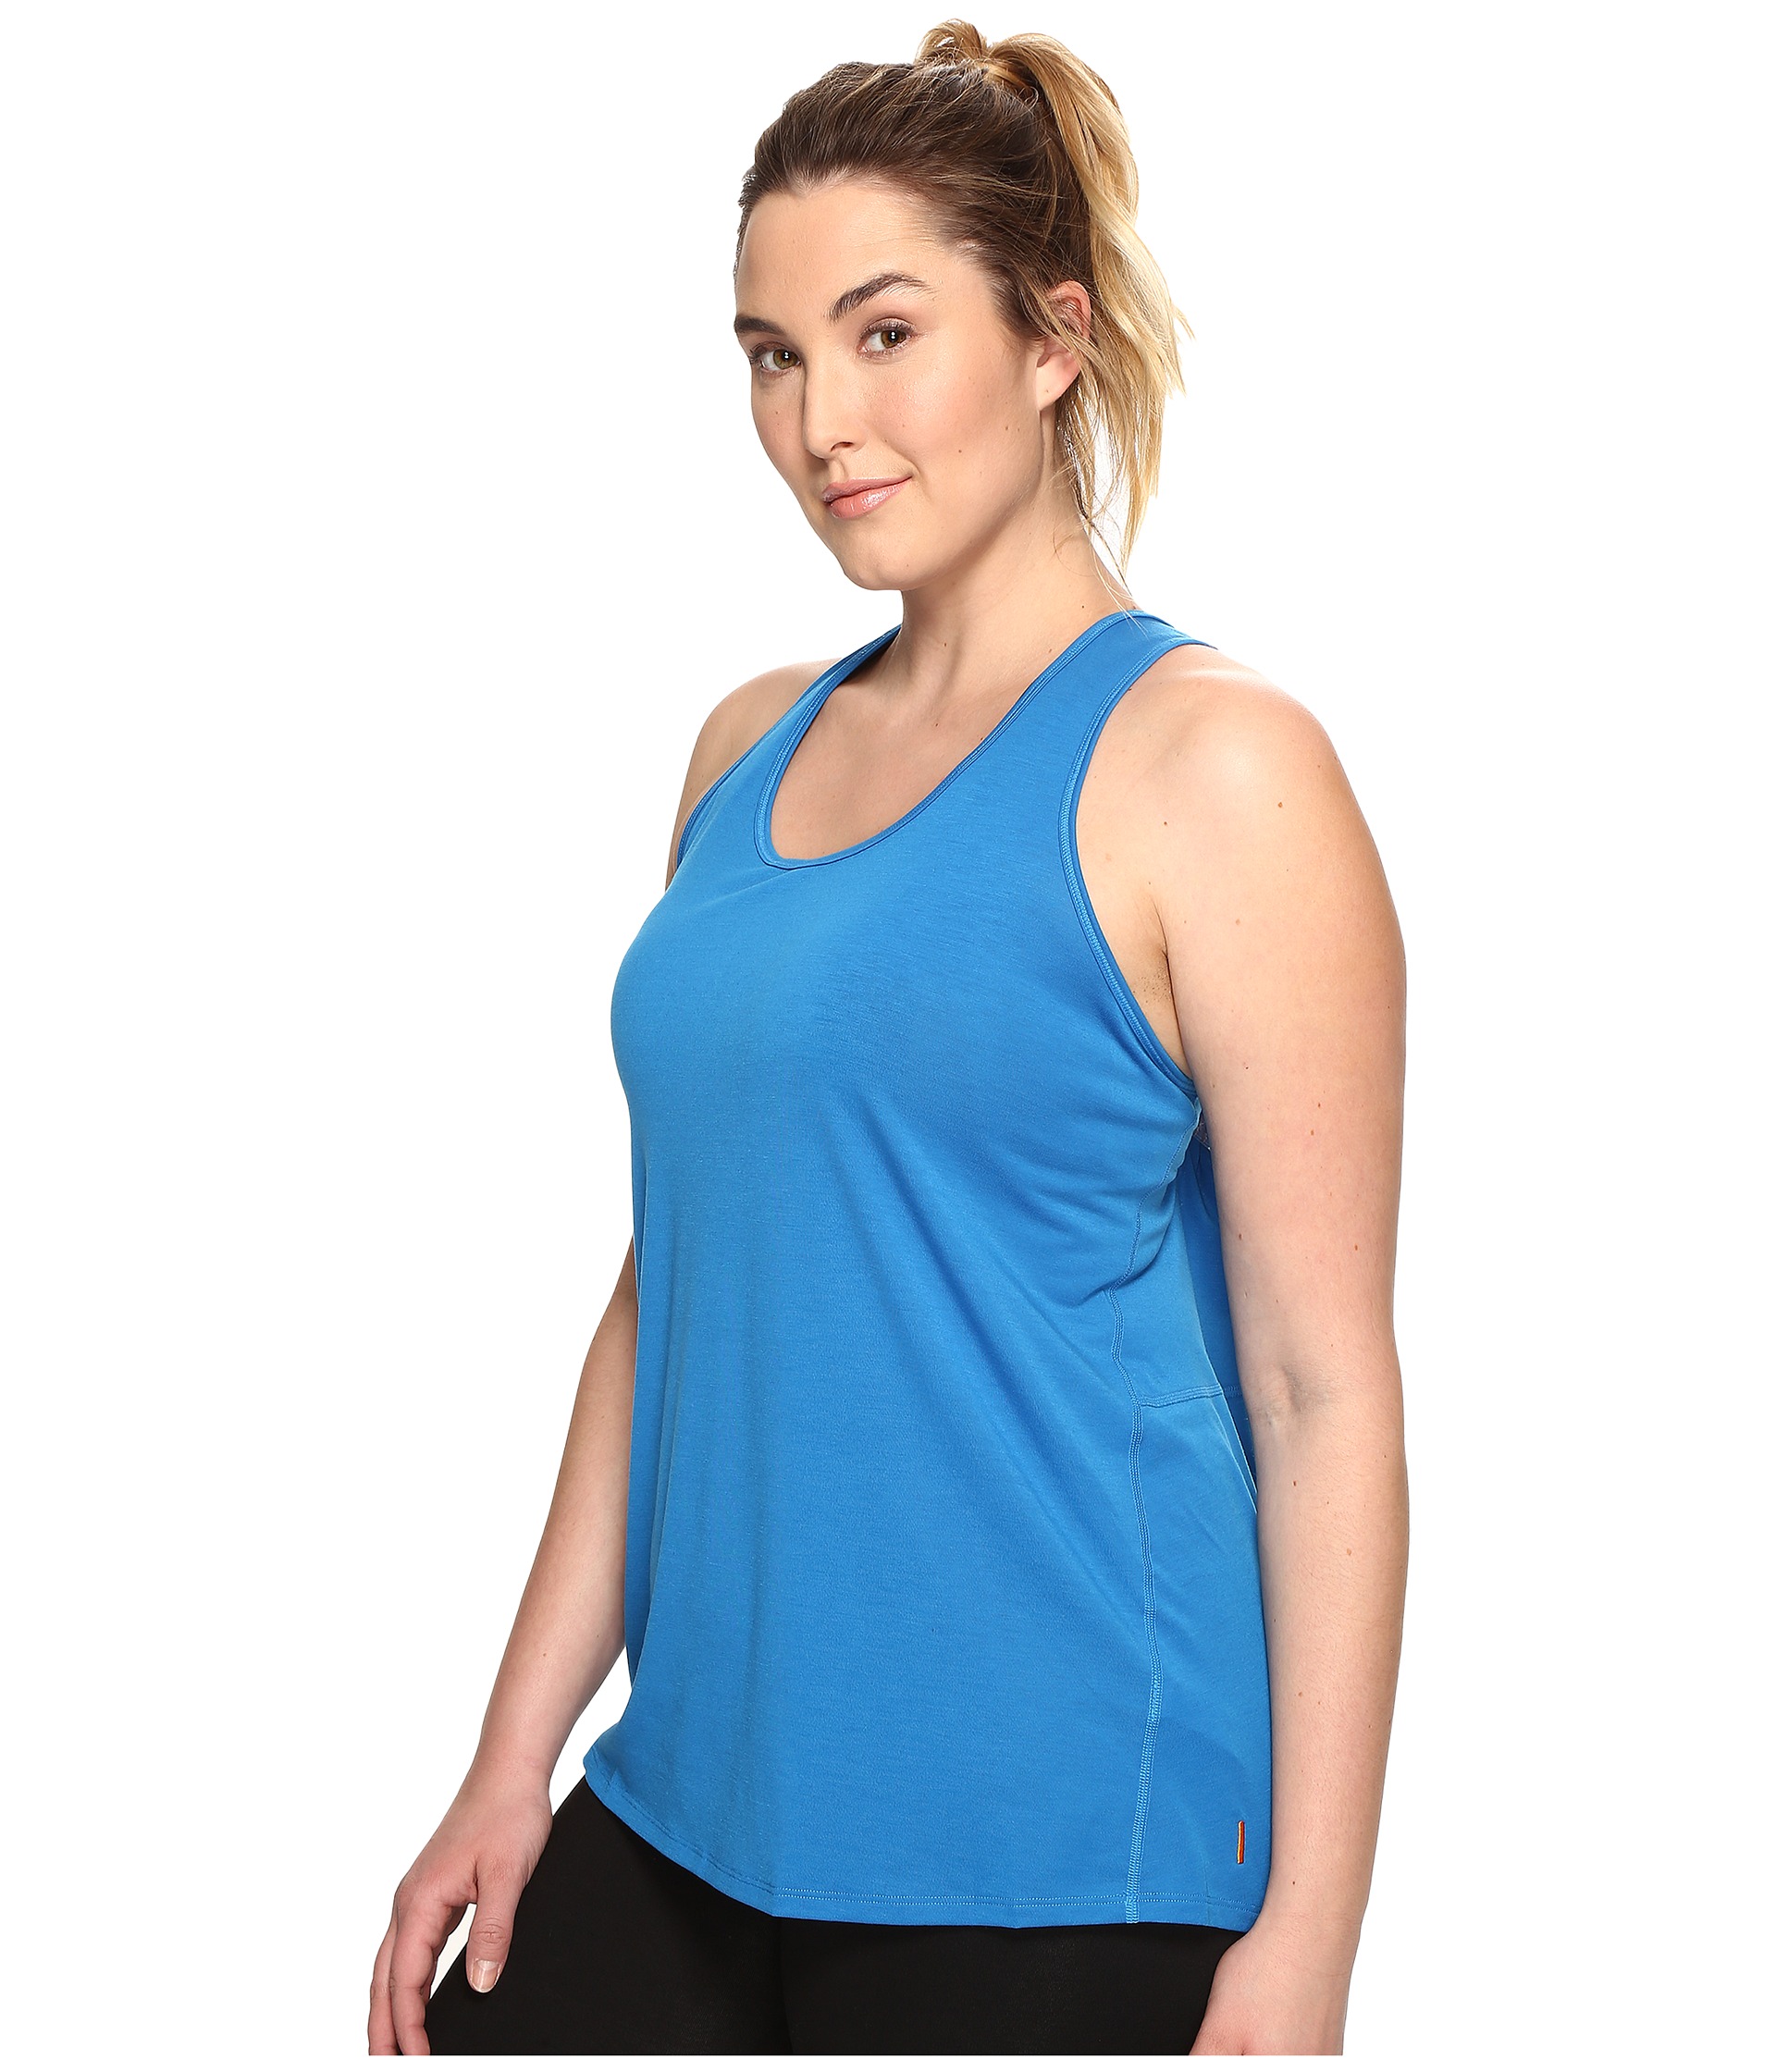 Lucy Extended Workout Racerback - Zappos.com Free Shipping BOTH Ways